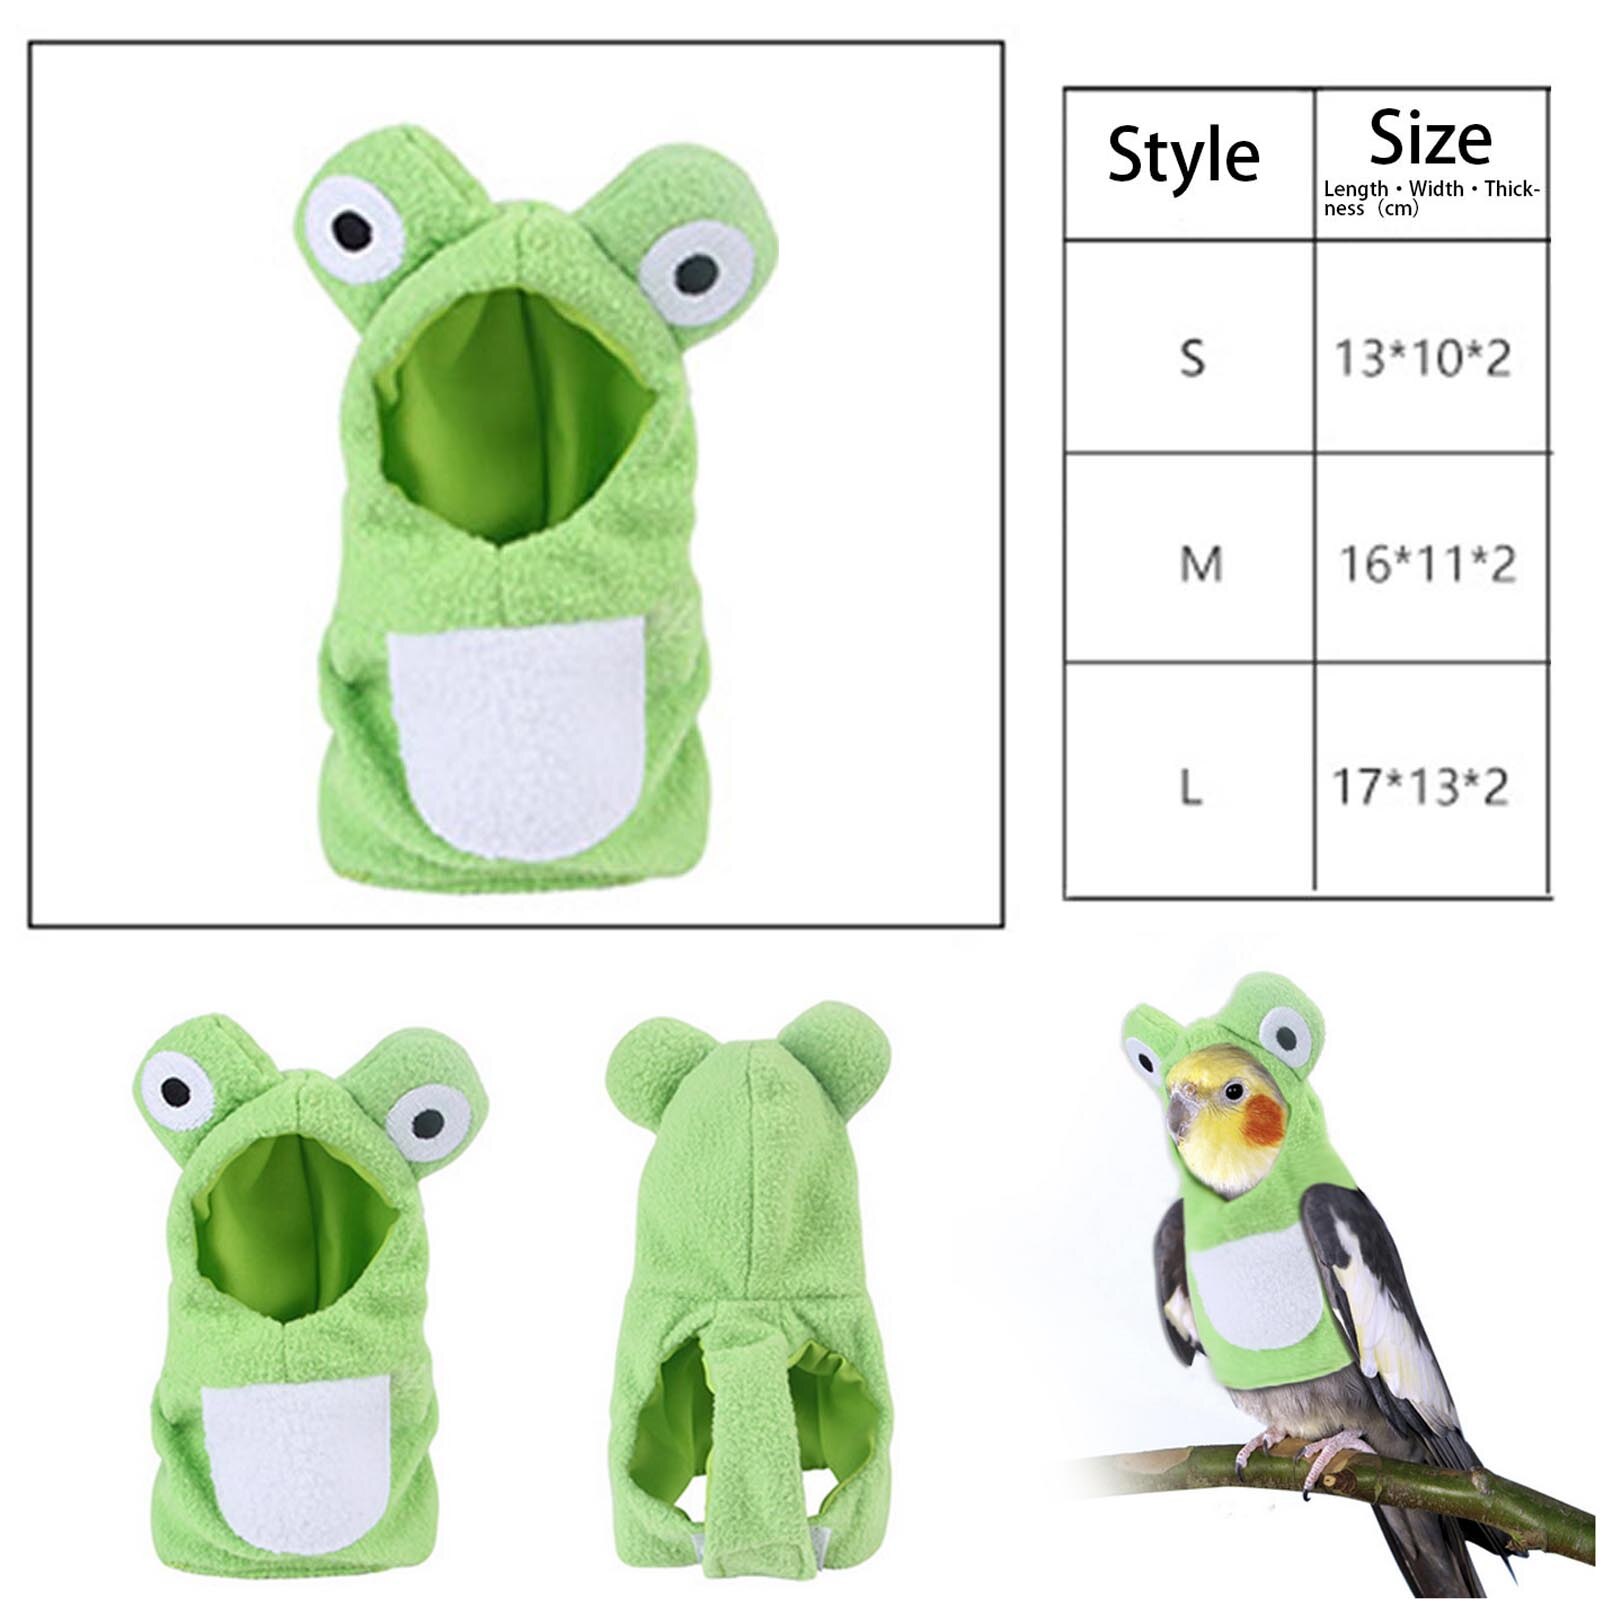 Bird's Hooded Winter Clothes Warm Hooded Coat Suit Frog Shape Cute Pet Parrot Outfit Winter Coat Warm Cozy Hooded Bird Clothes